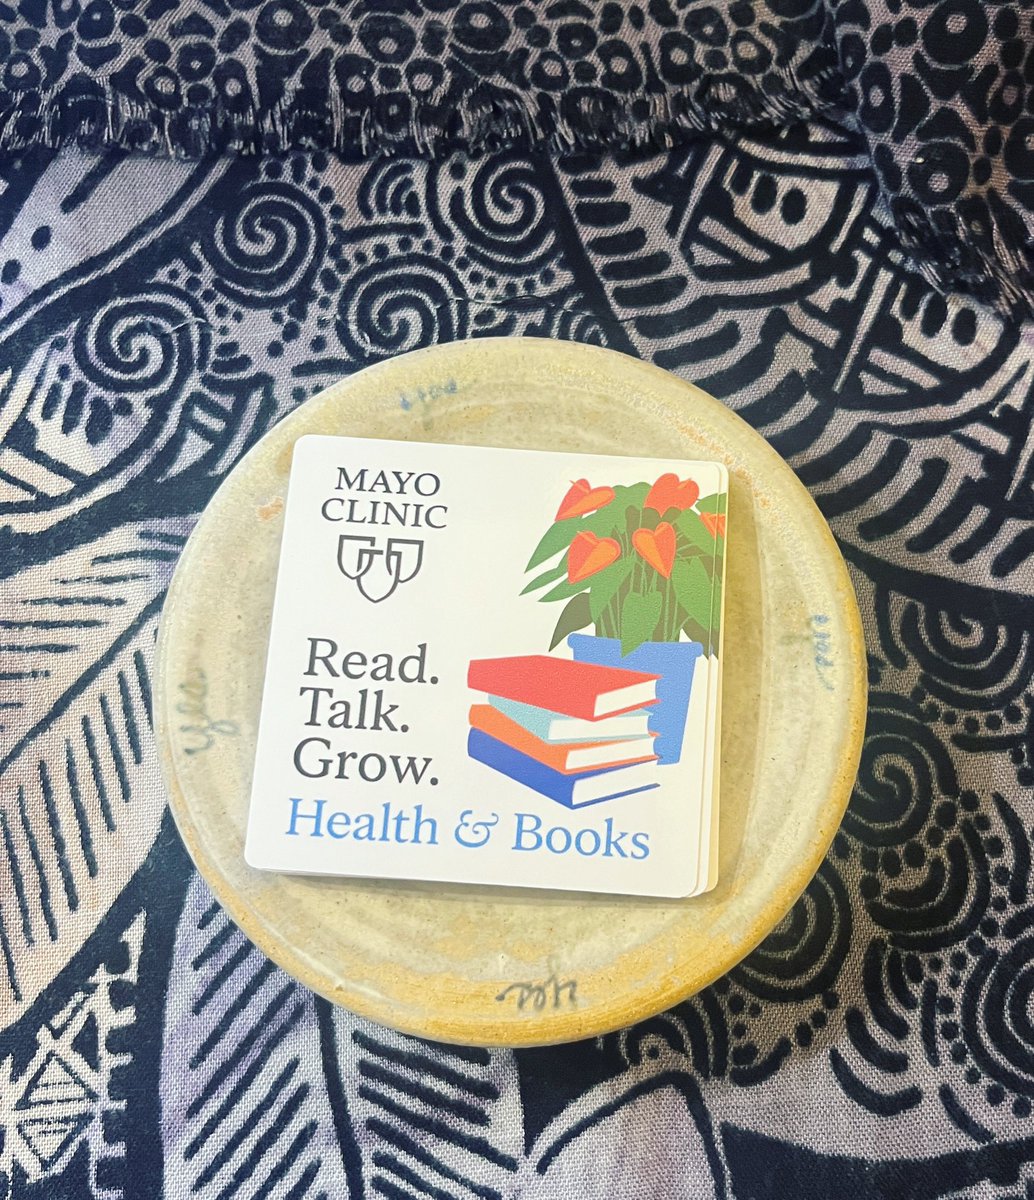 Heading to @latimesfob this weekend Anybody have a book that’s a good fit for @mayoclinic #readtalkgrow podcast? #BookX